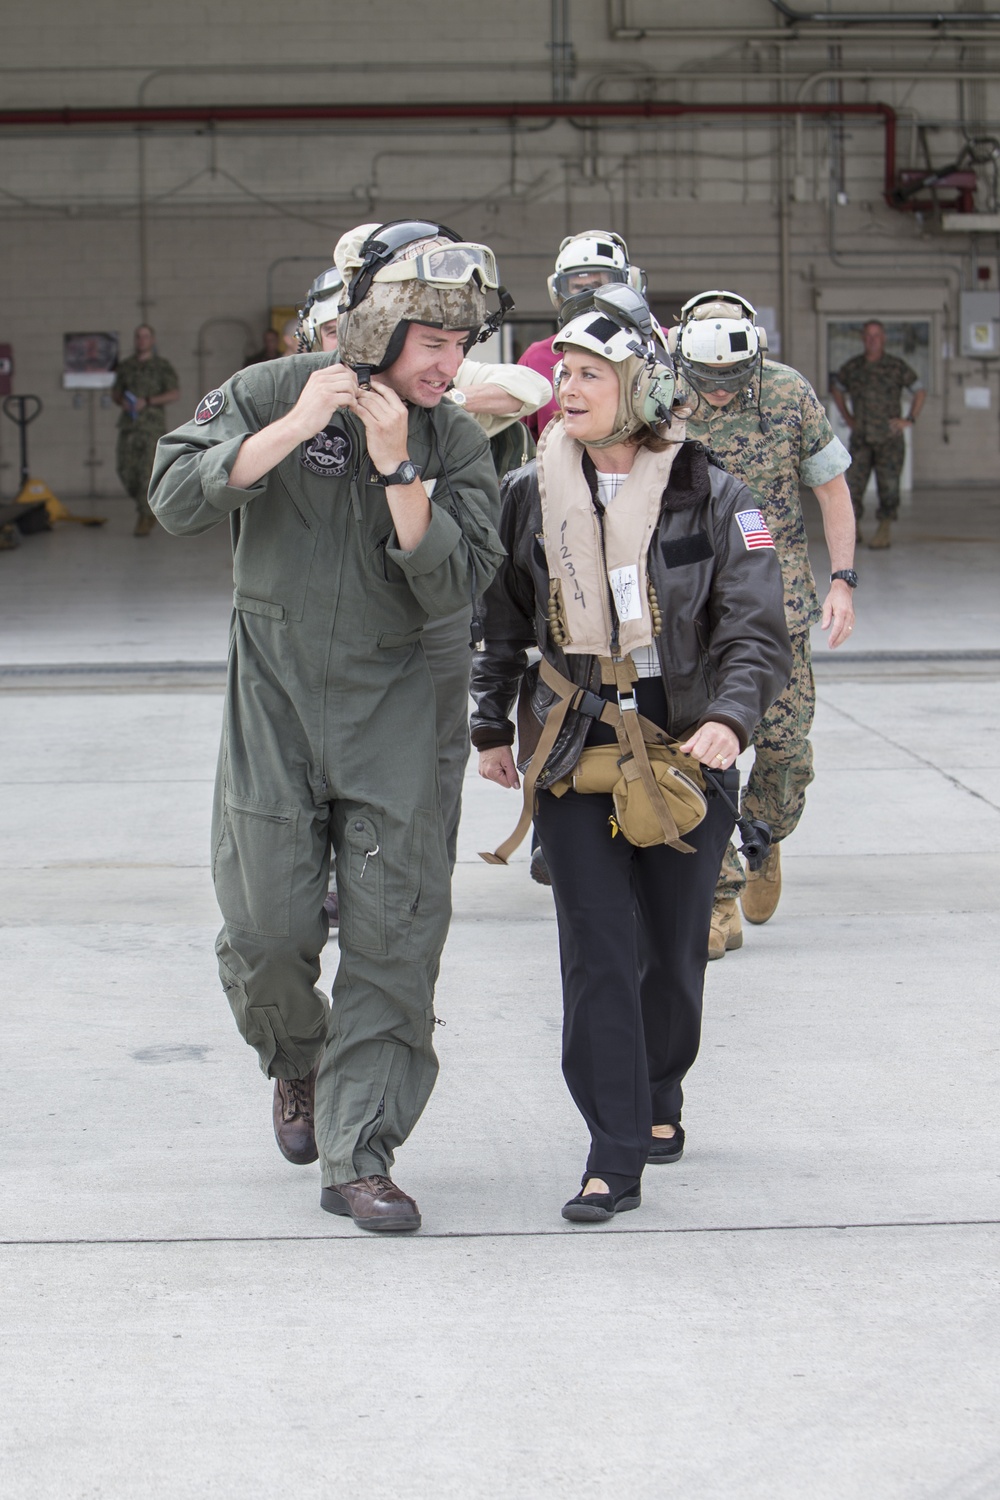 Assistant Secretary of the Navy visits Camp Pendleton